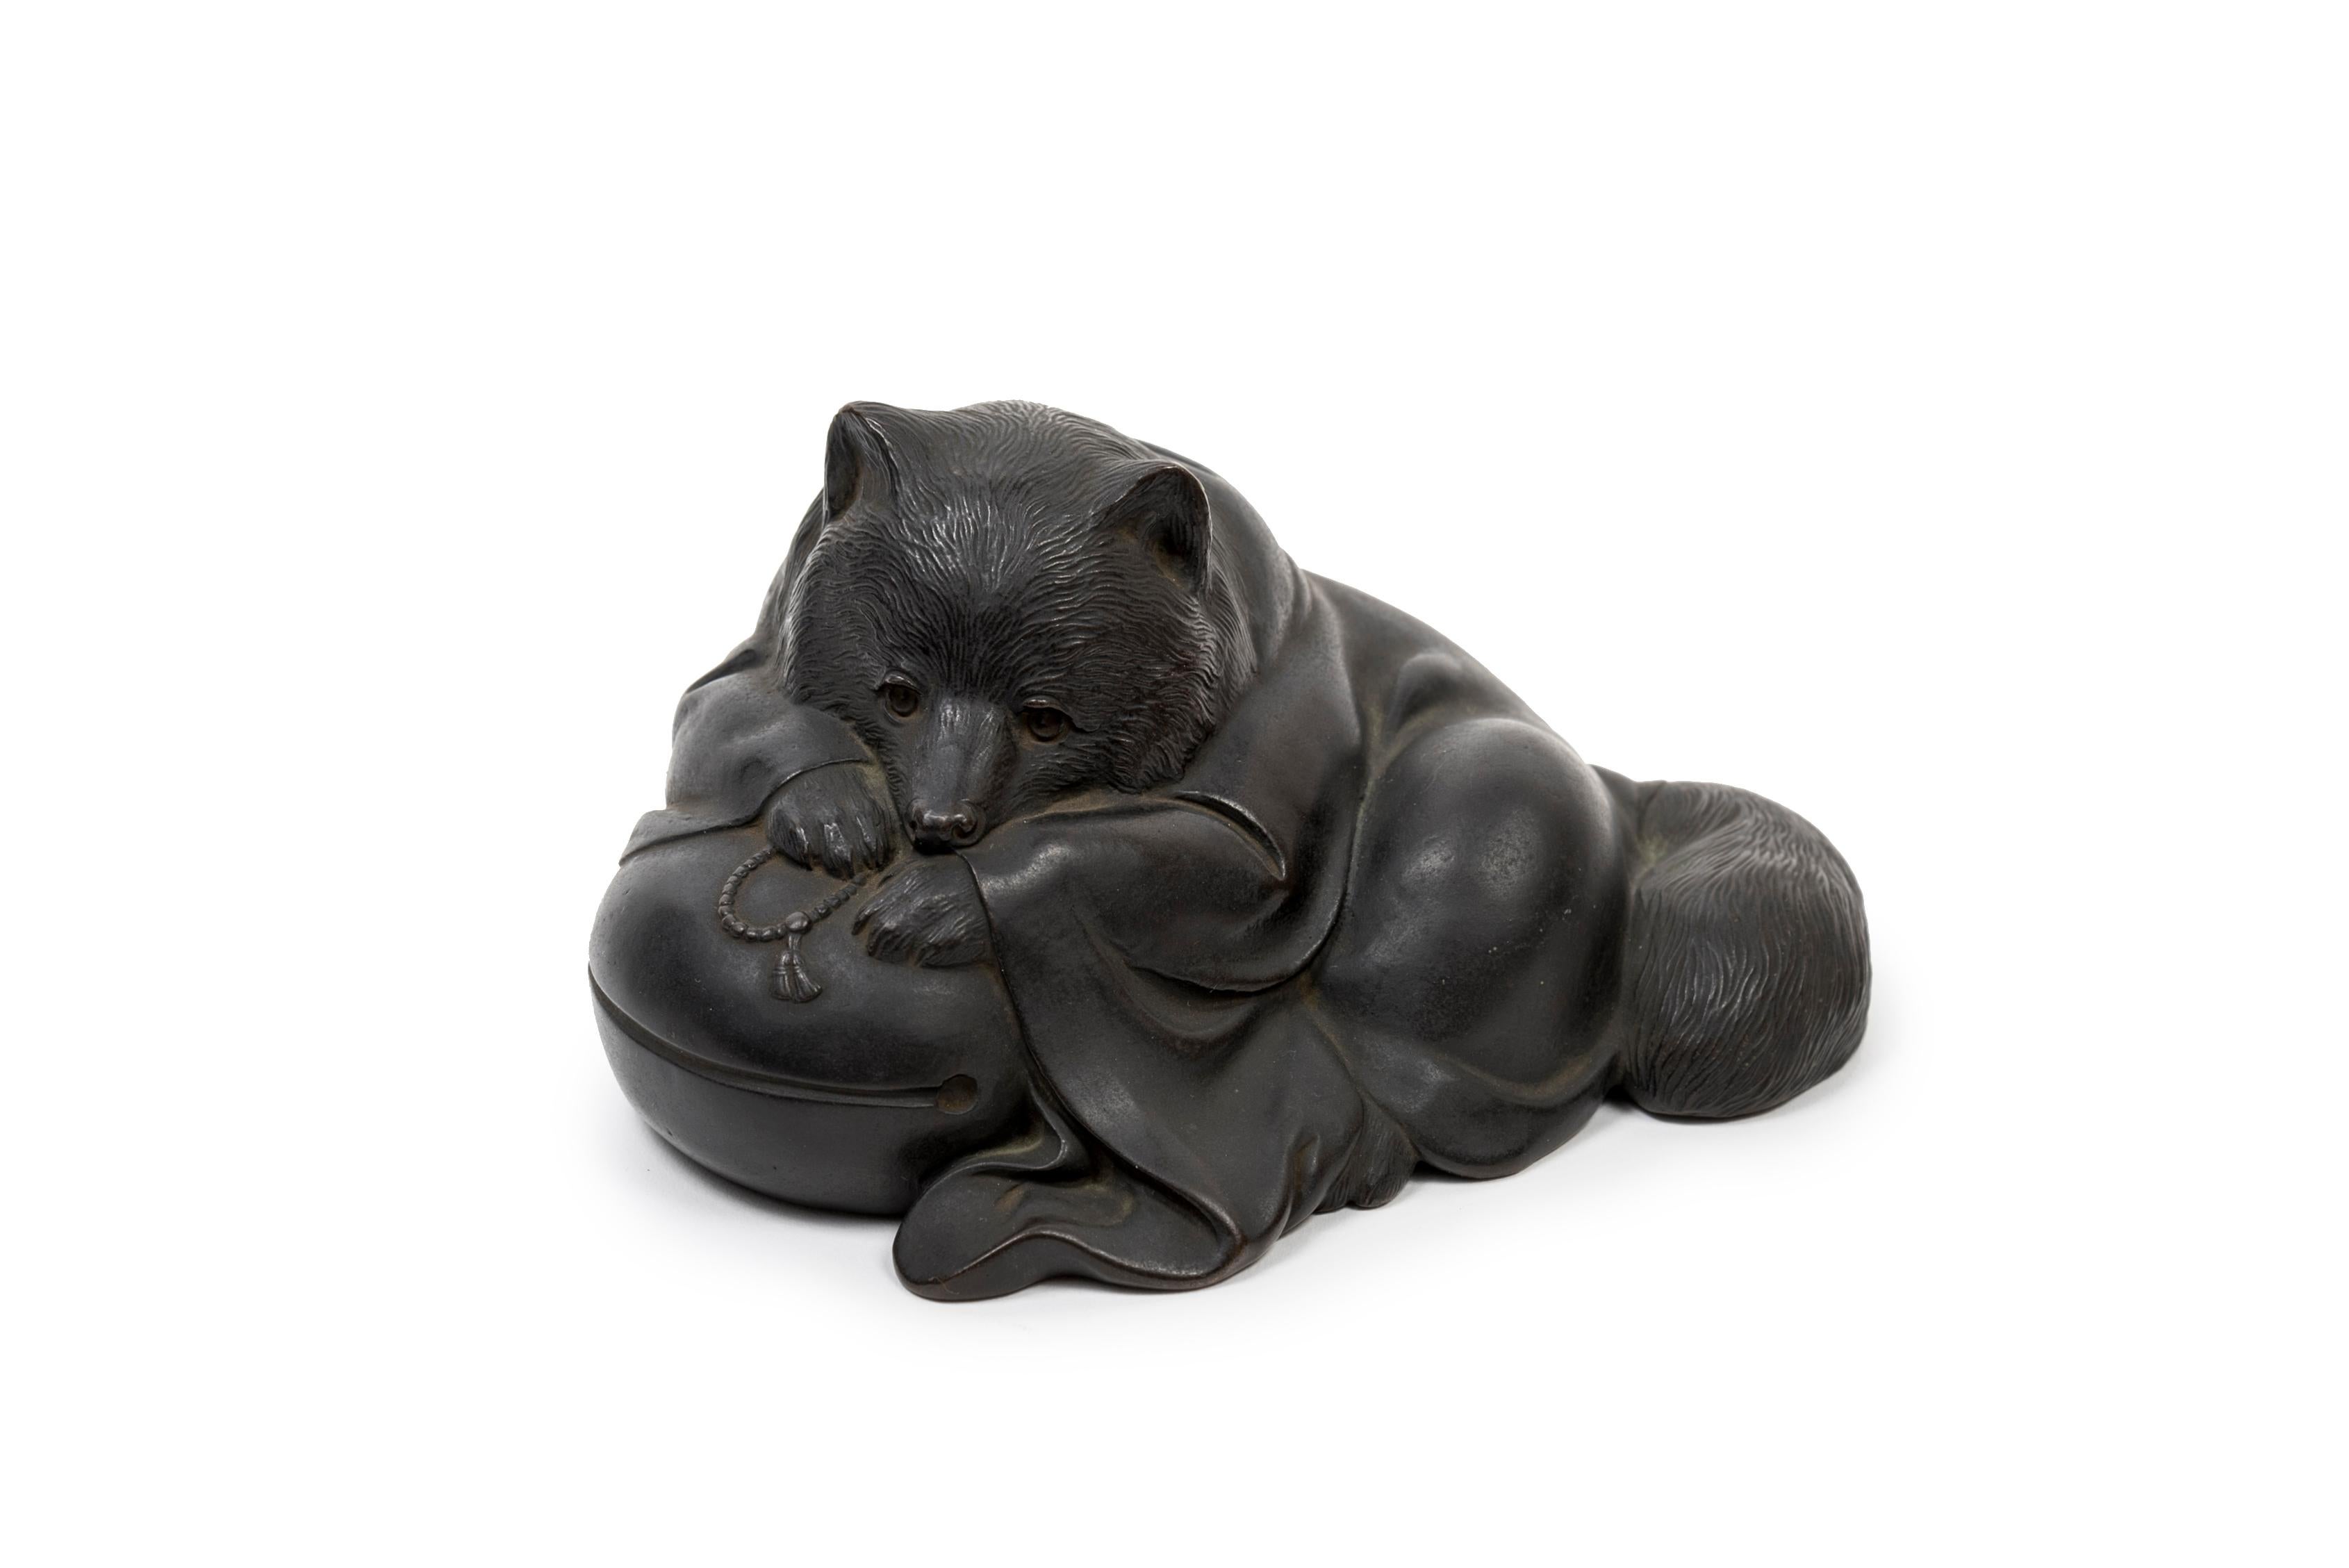 Japanese bronze sculpture of a tanuki. It represented as a Buddhist priest, wrapped in a cloak and lying on a mokugyo (a percussion instrument made of a fish-shaped wooden block and a stick, used to accompany the recitation of sutras).

The tanuki